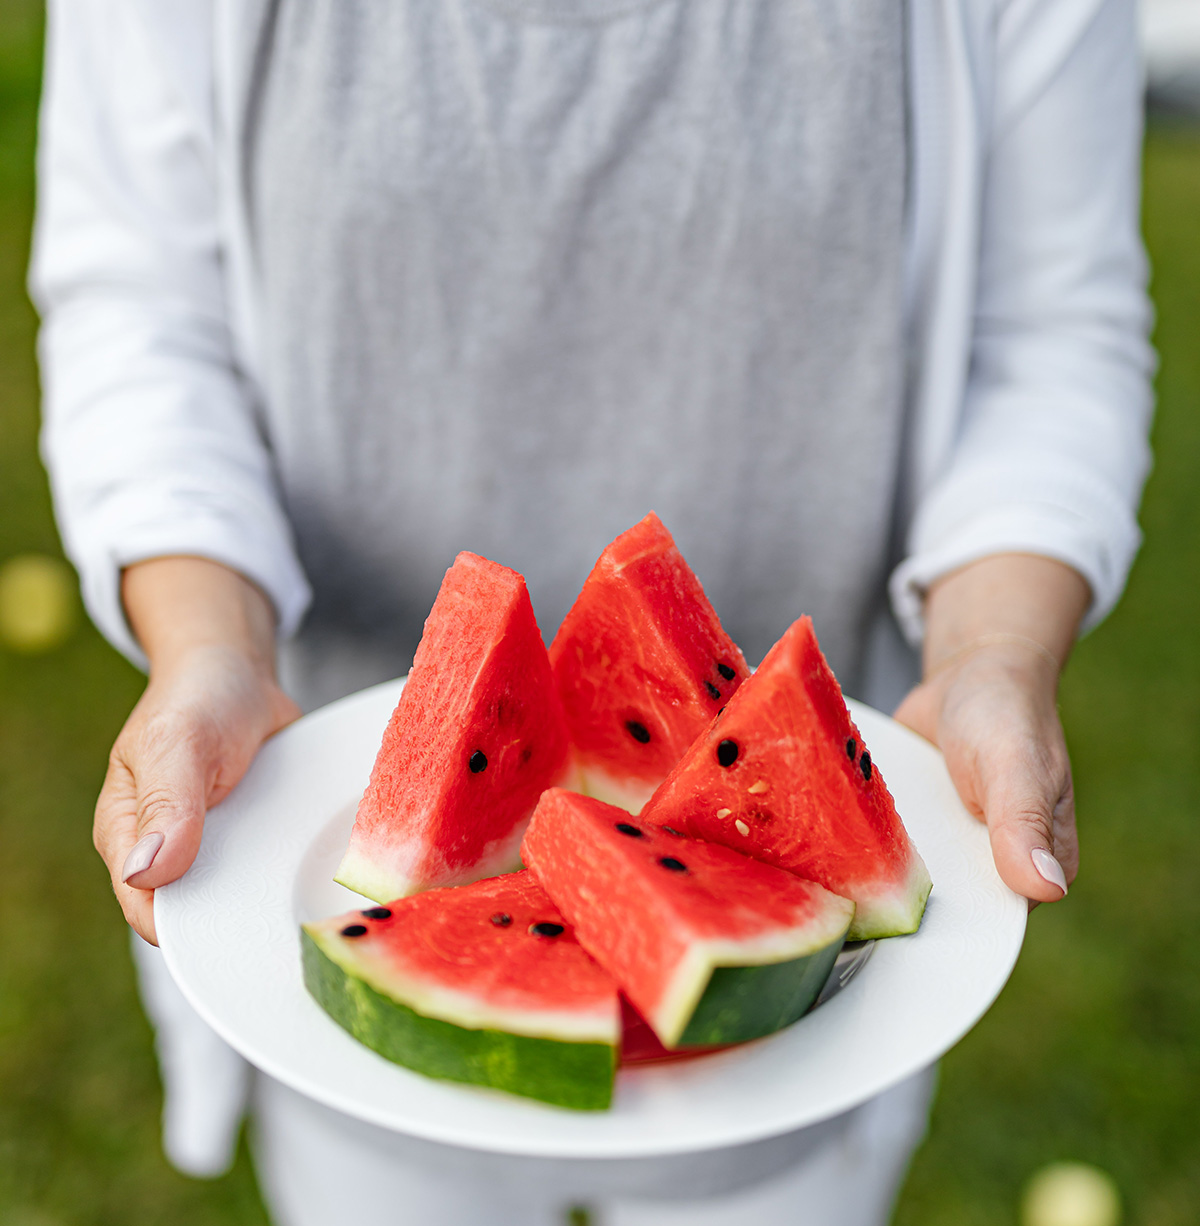 watermelon contains more than 90% water - eat more water for hydration and improved health